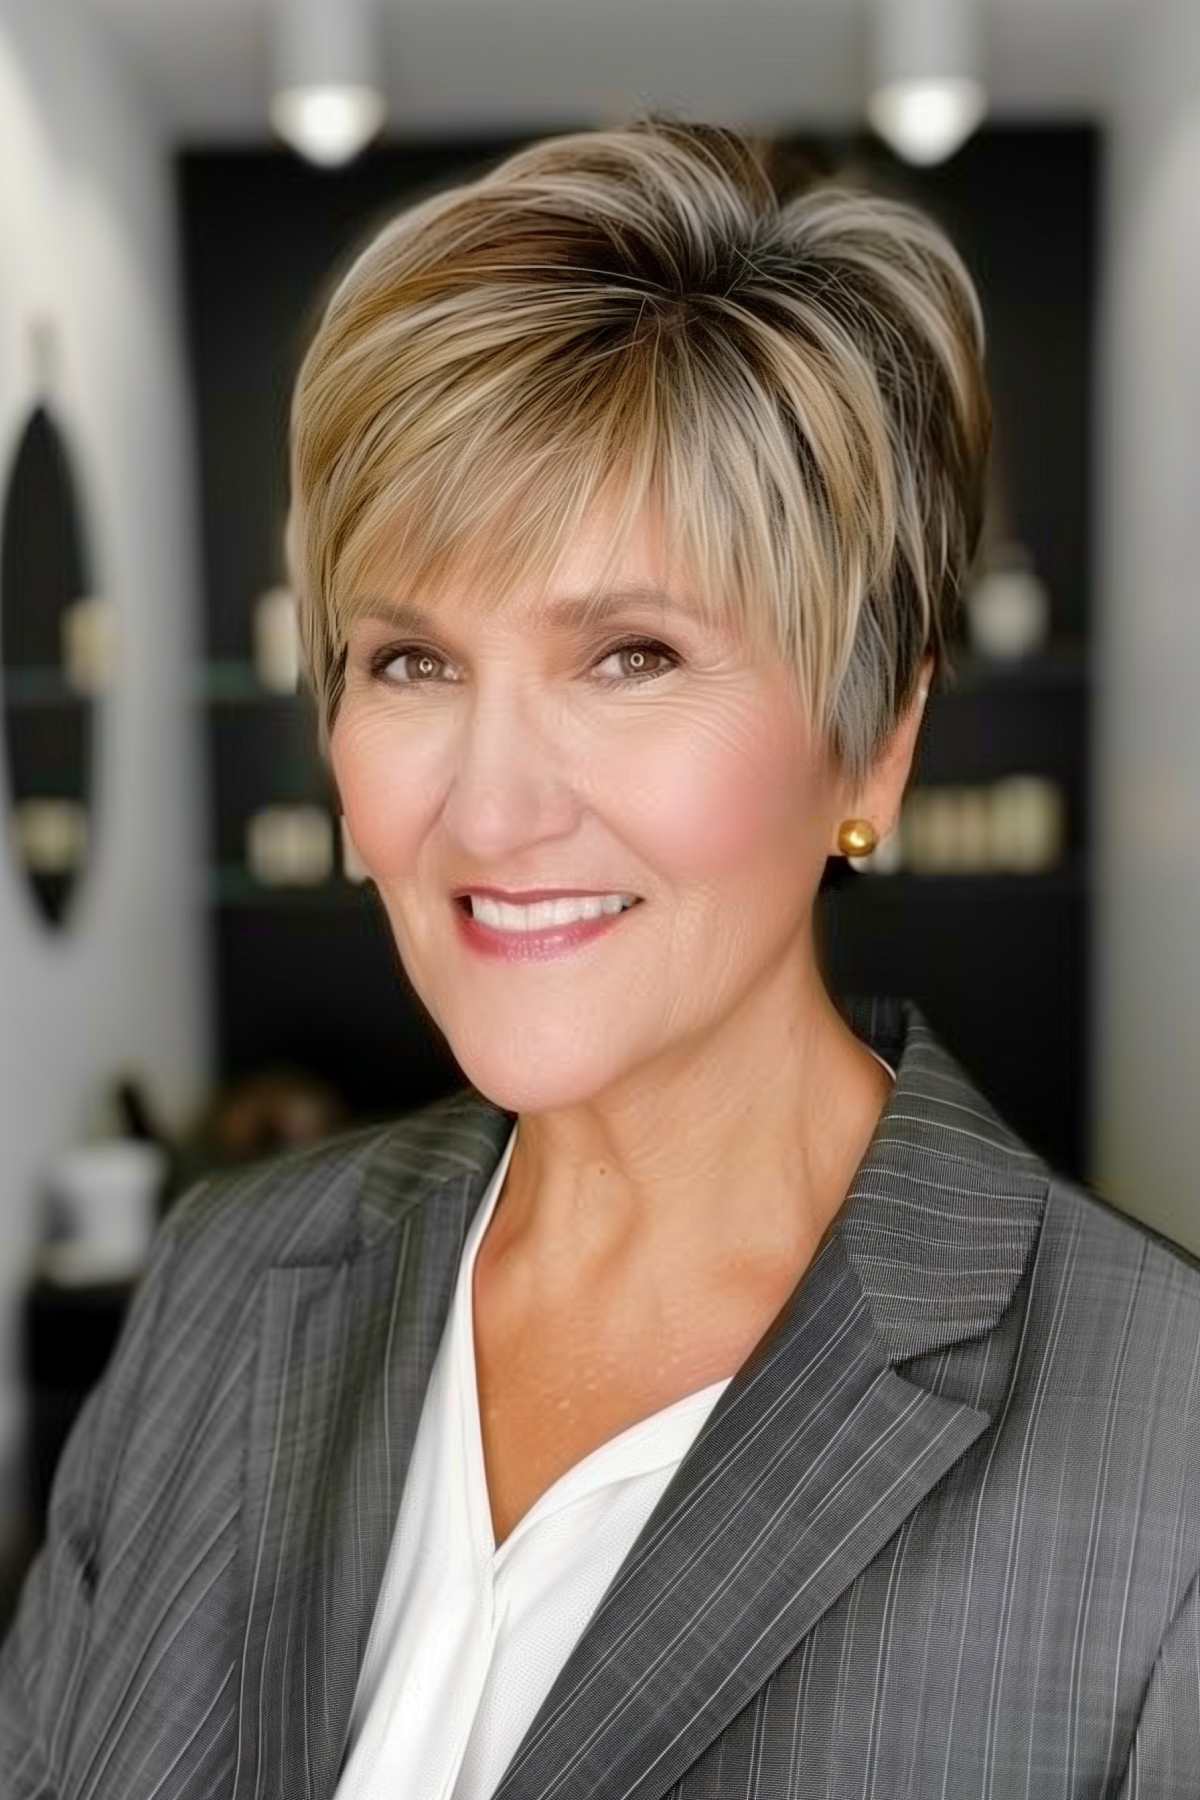 Short layered hairstyle with natural brown and blonde highlights on a woman over 50, styled to enhance volume and texture.